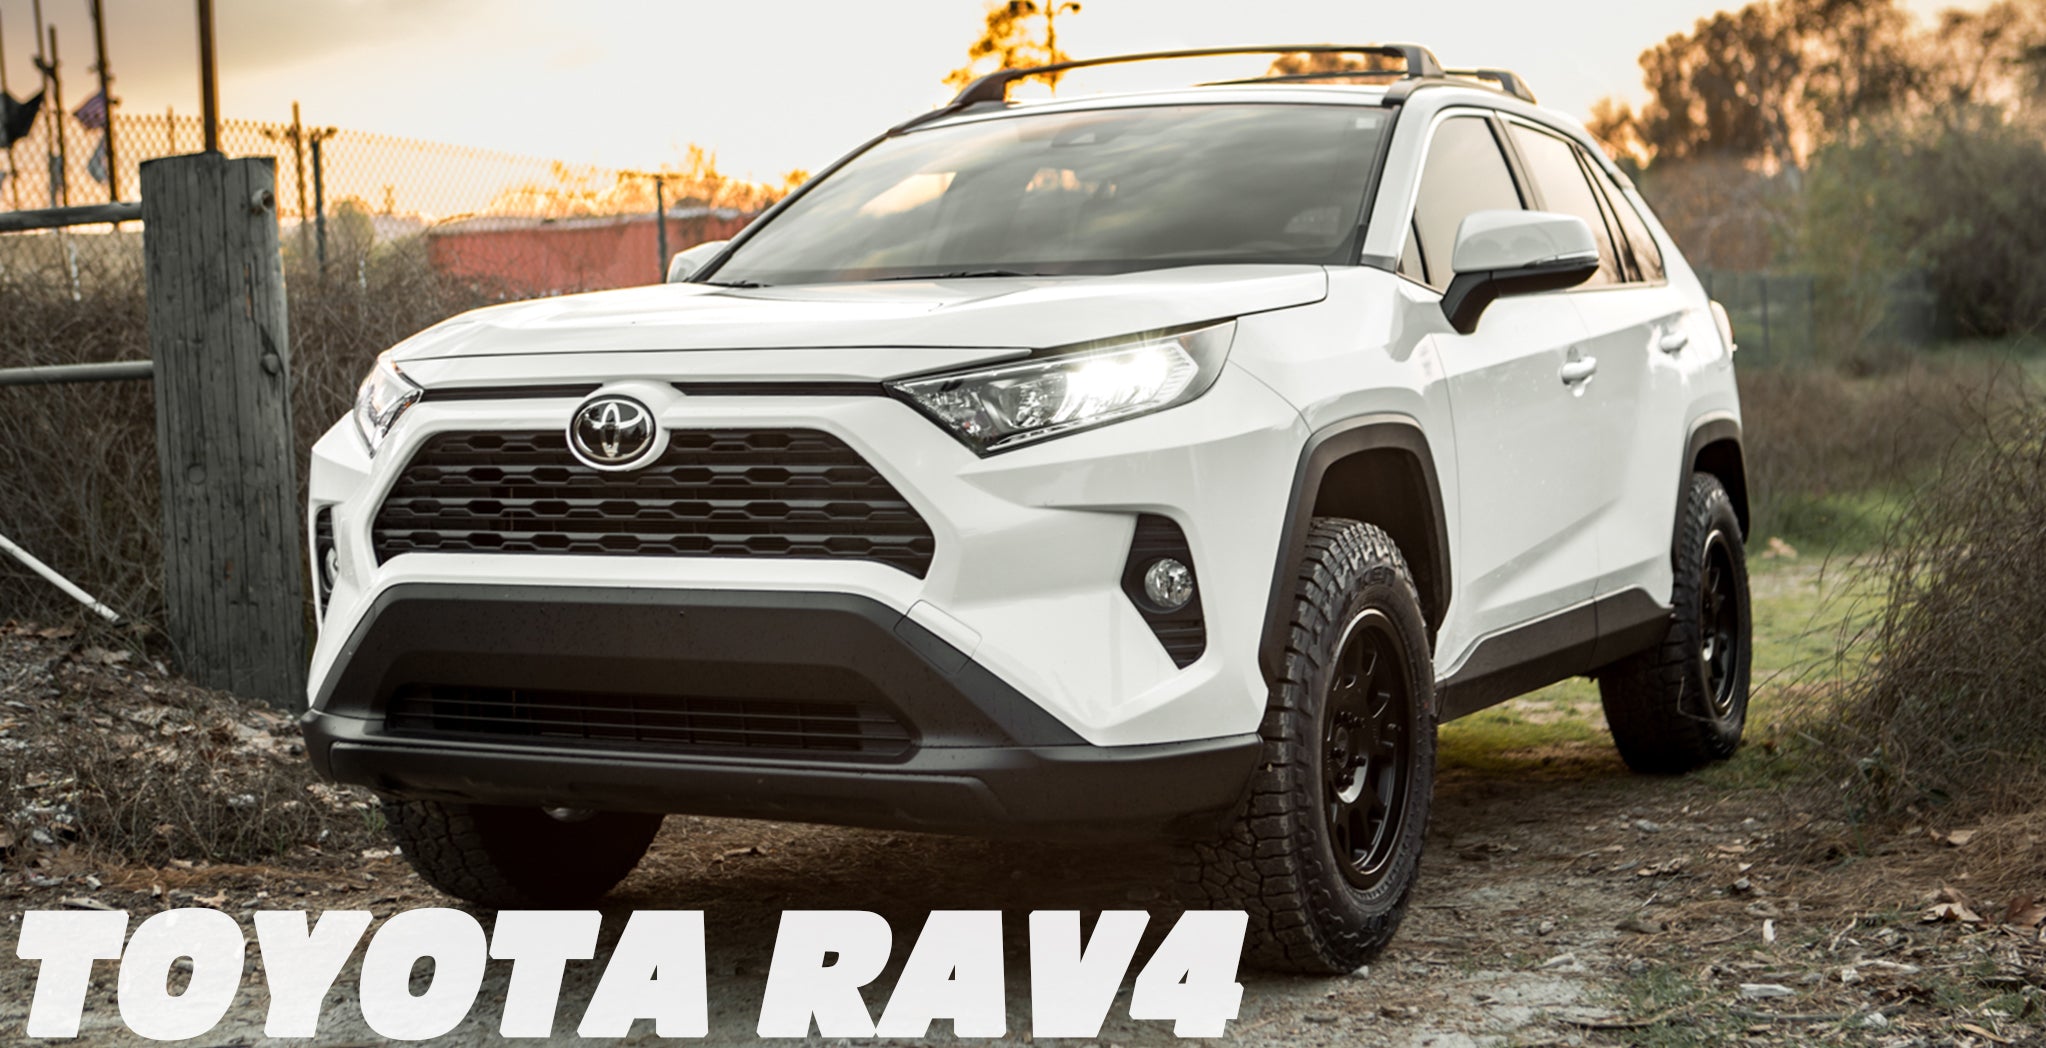 Toyota Rav4 Offroad Wheels and Accessories | RRW Tagged 